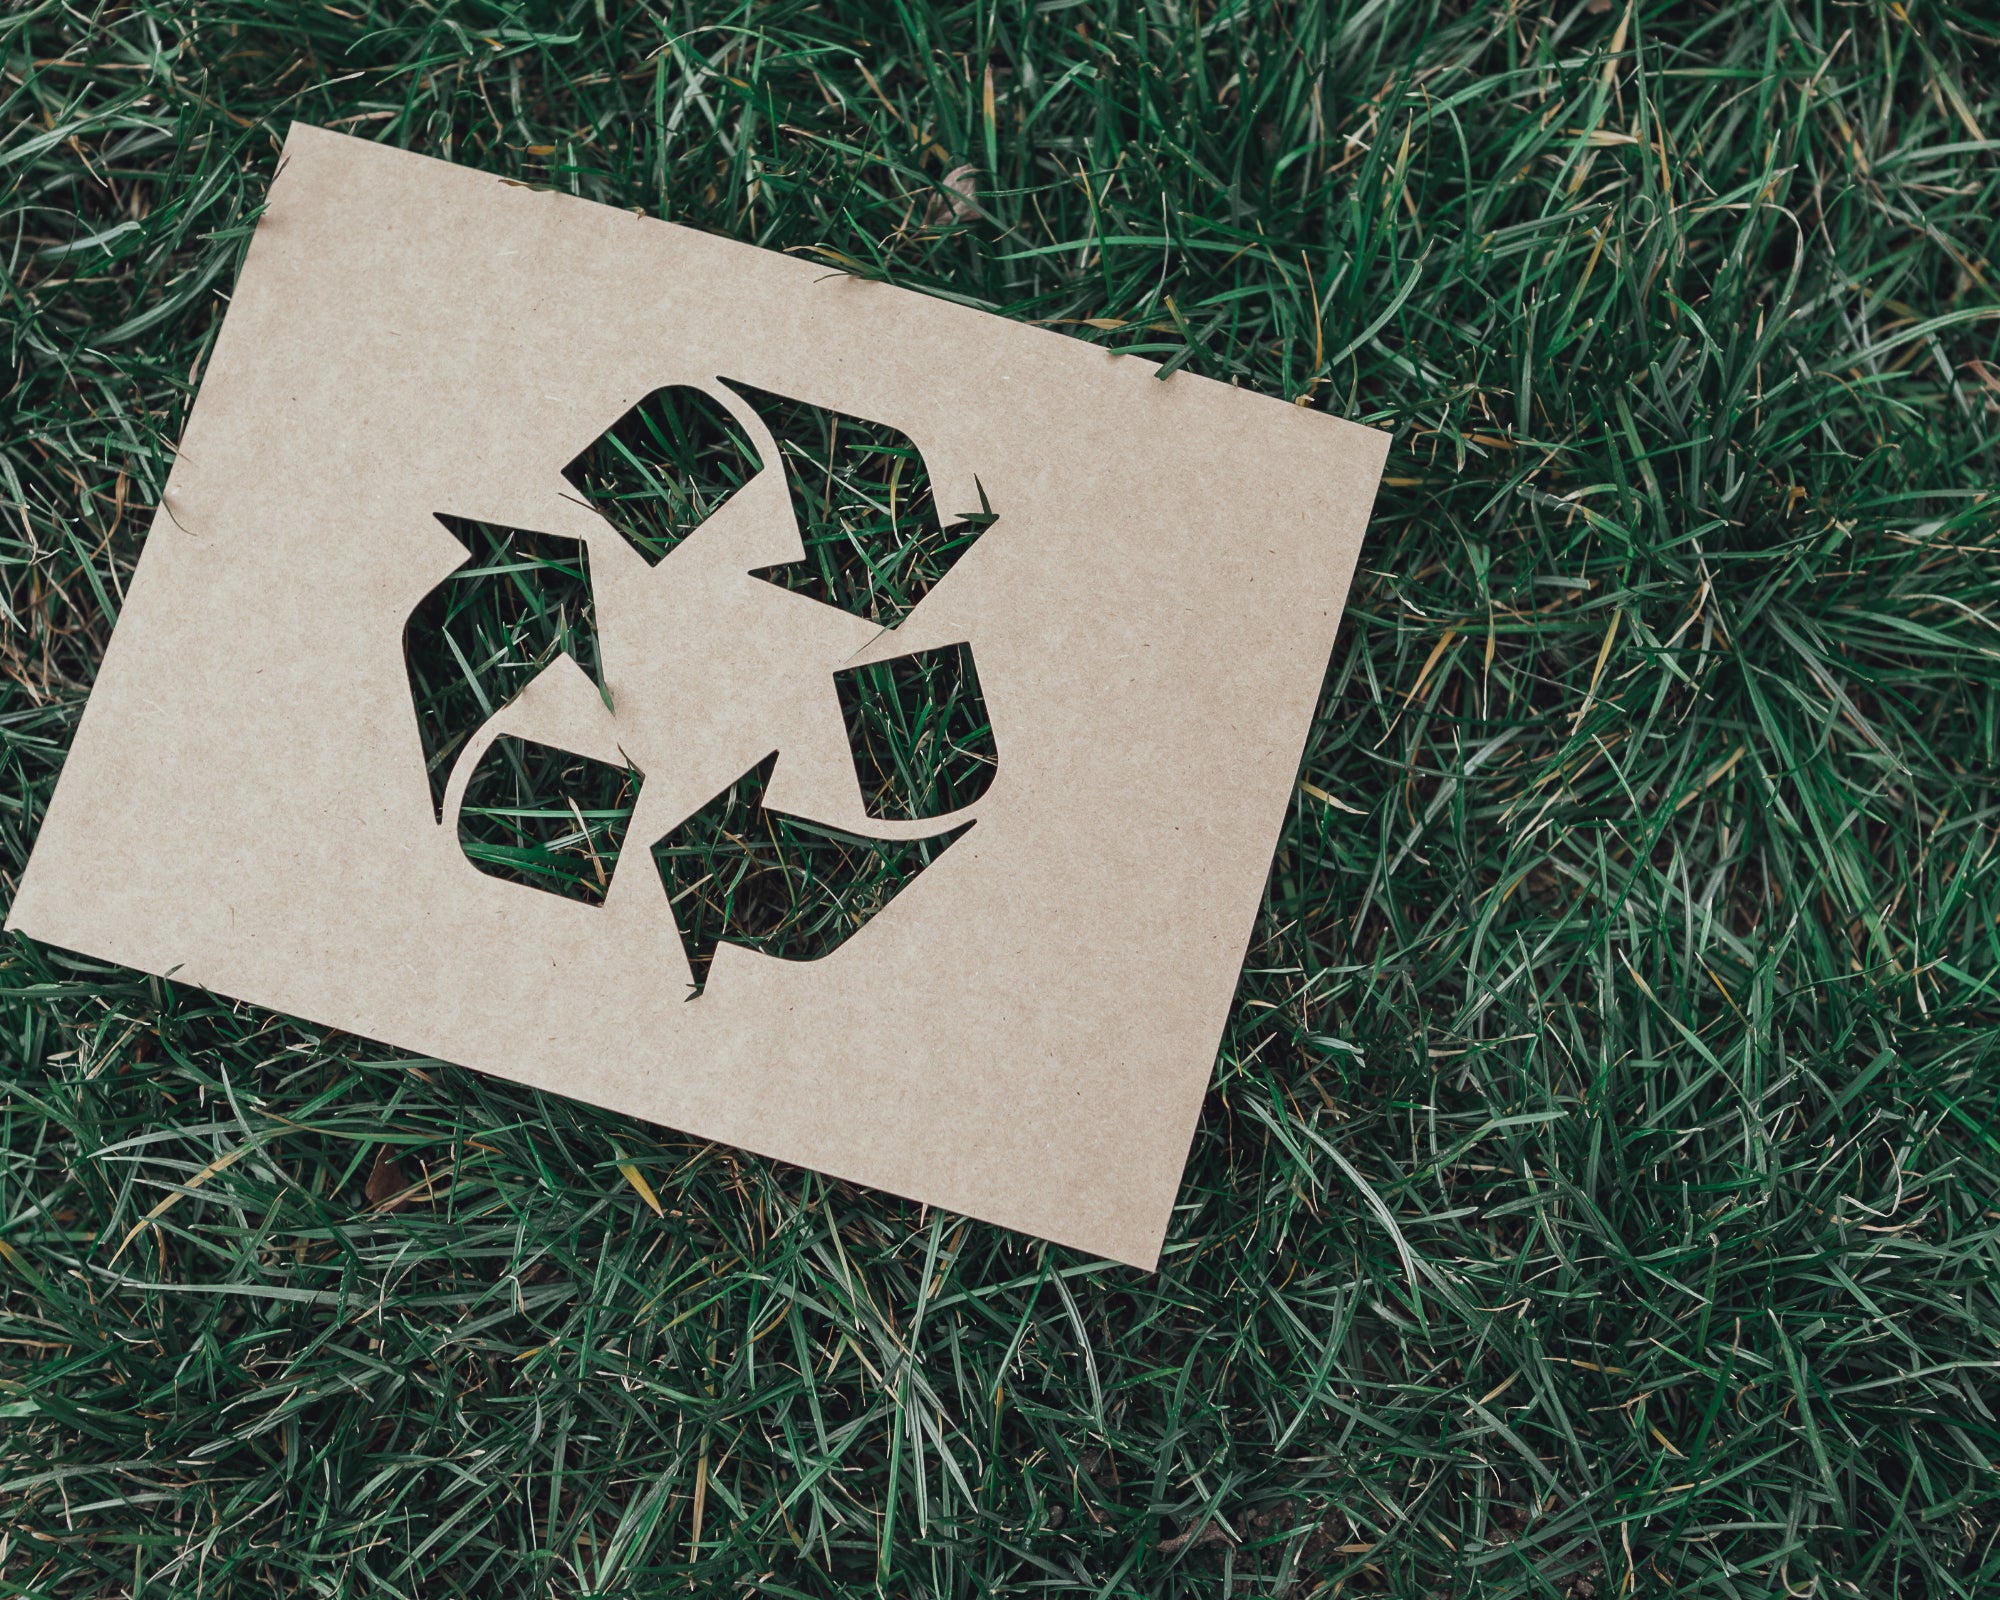 Tips on Recycling or Reusing Your Packaging